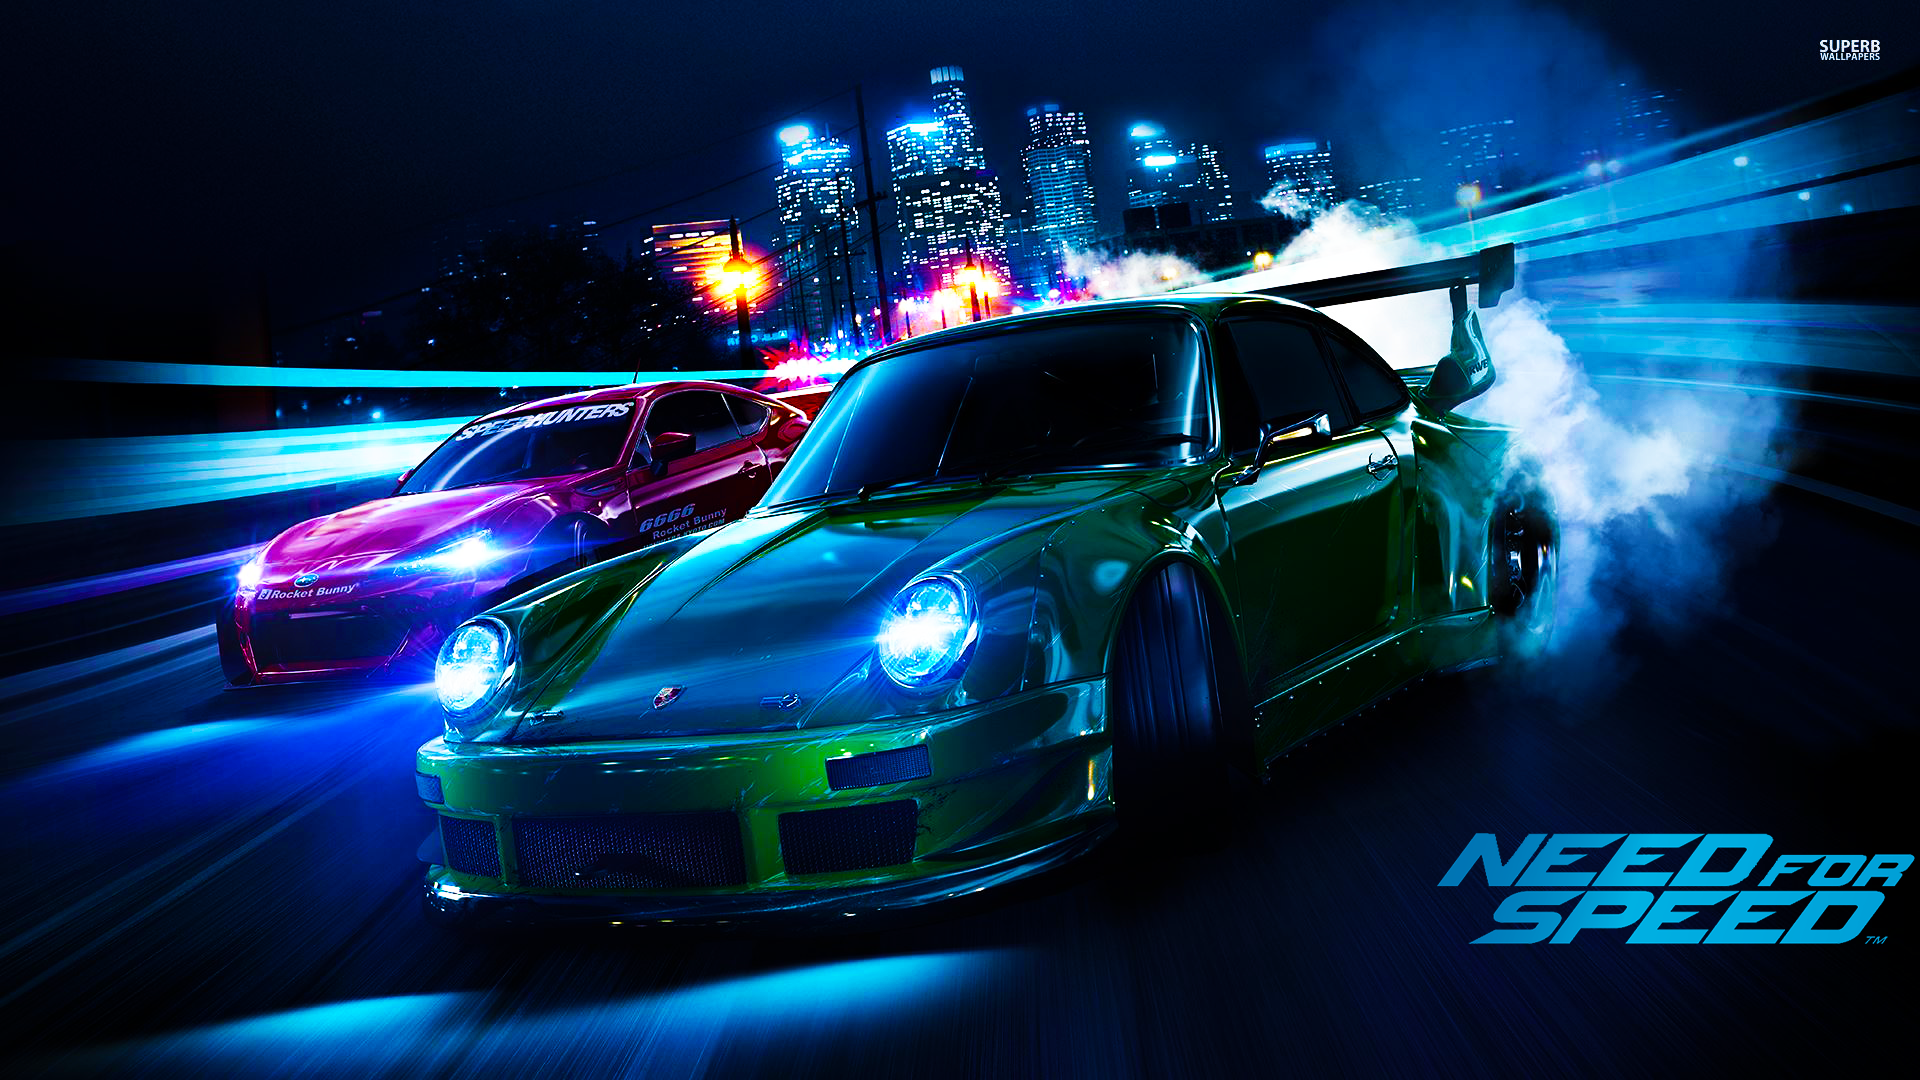 Need for speed hd papers and backgrounds